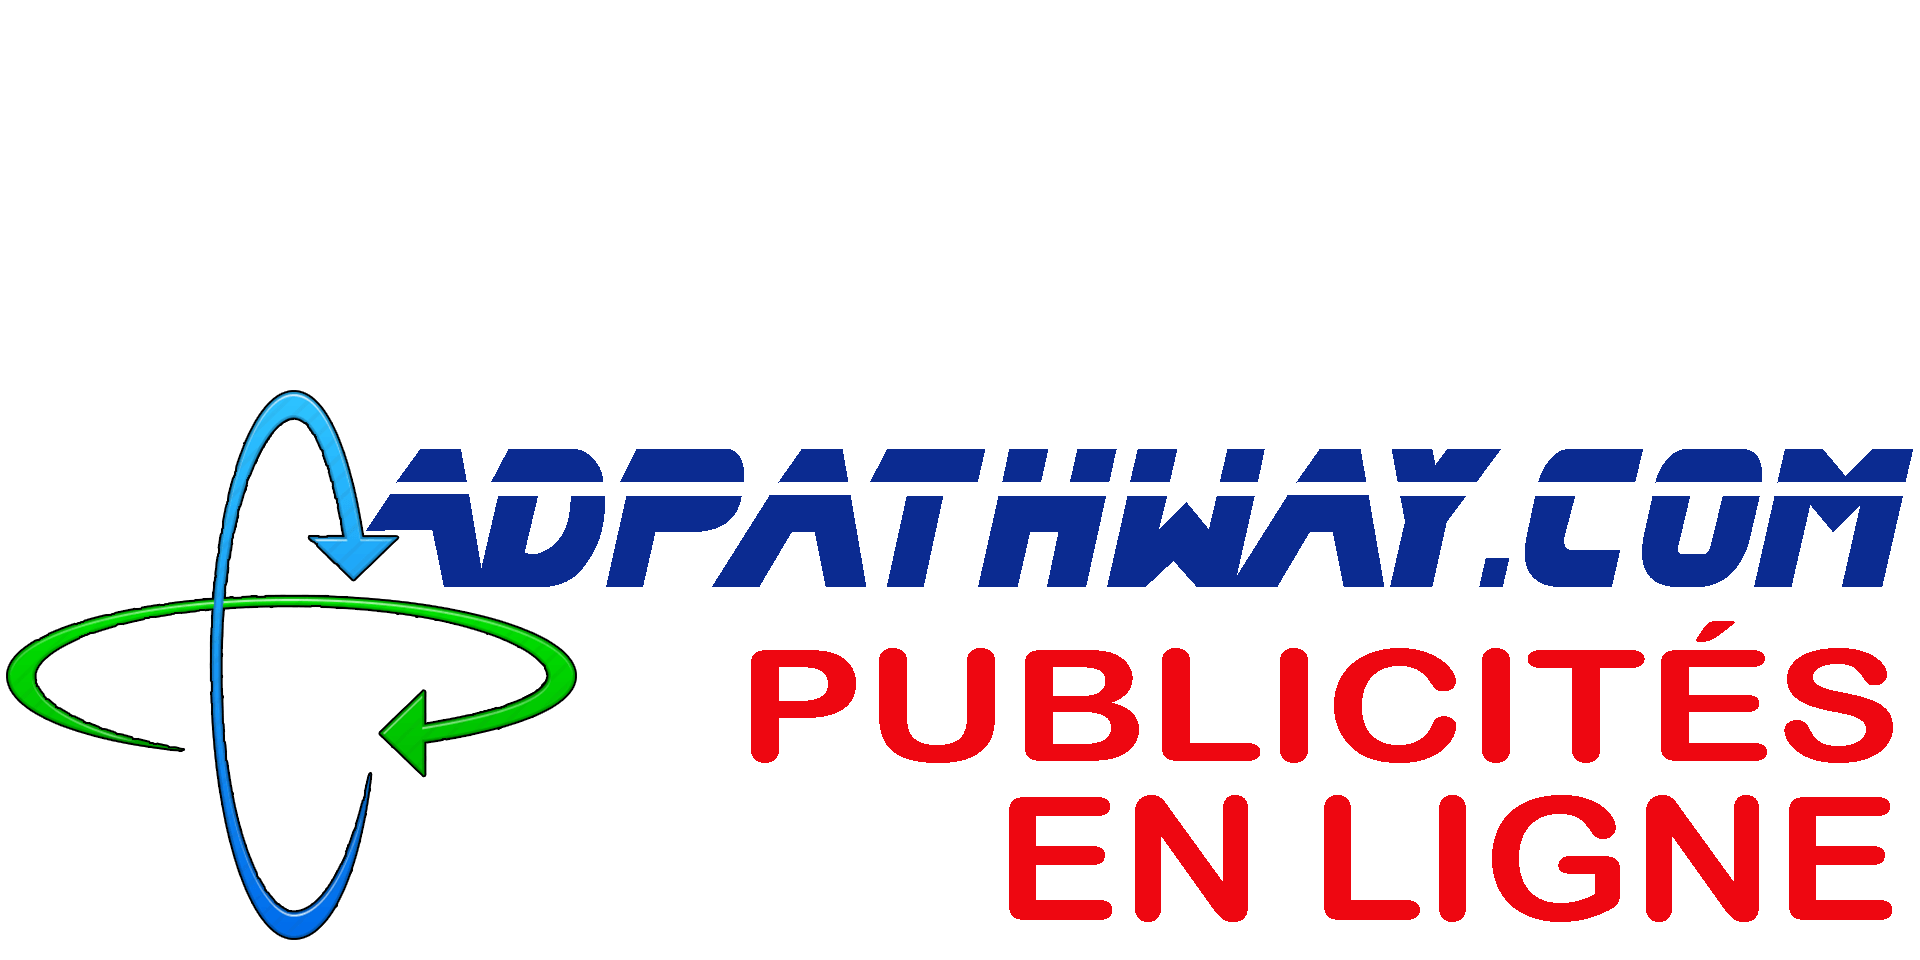 Final logo Adpathway FRENCH 1920x960px